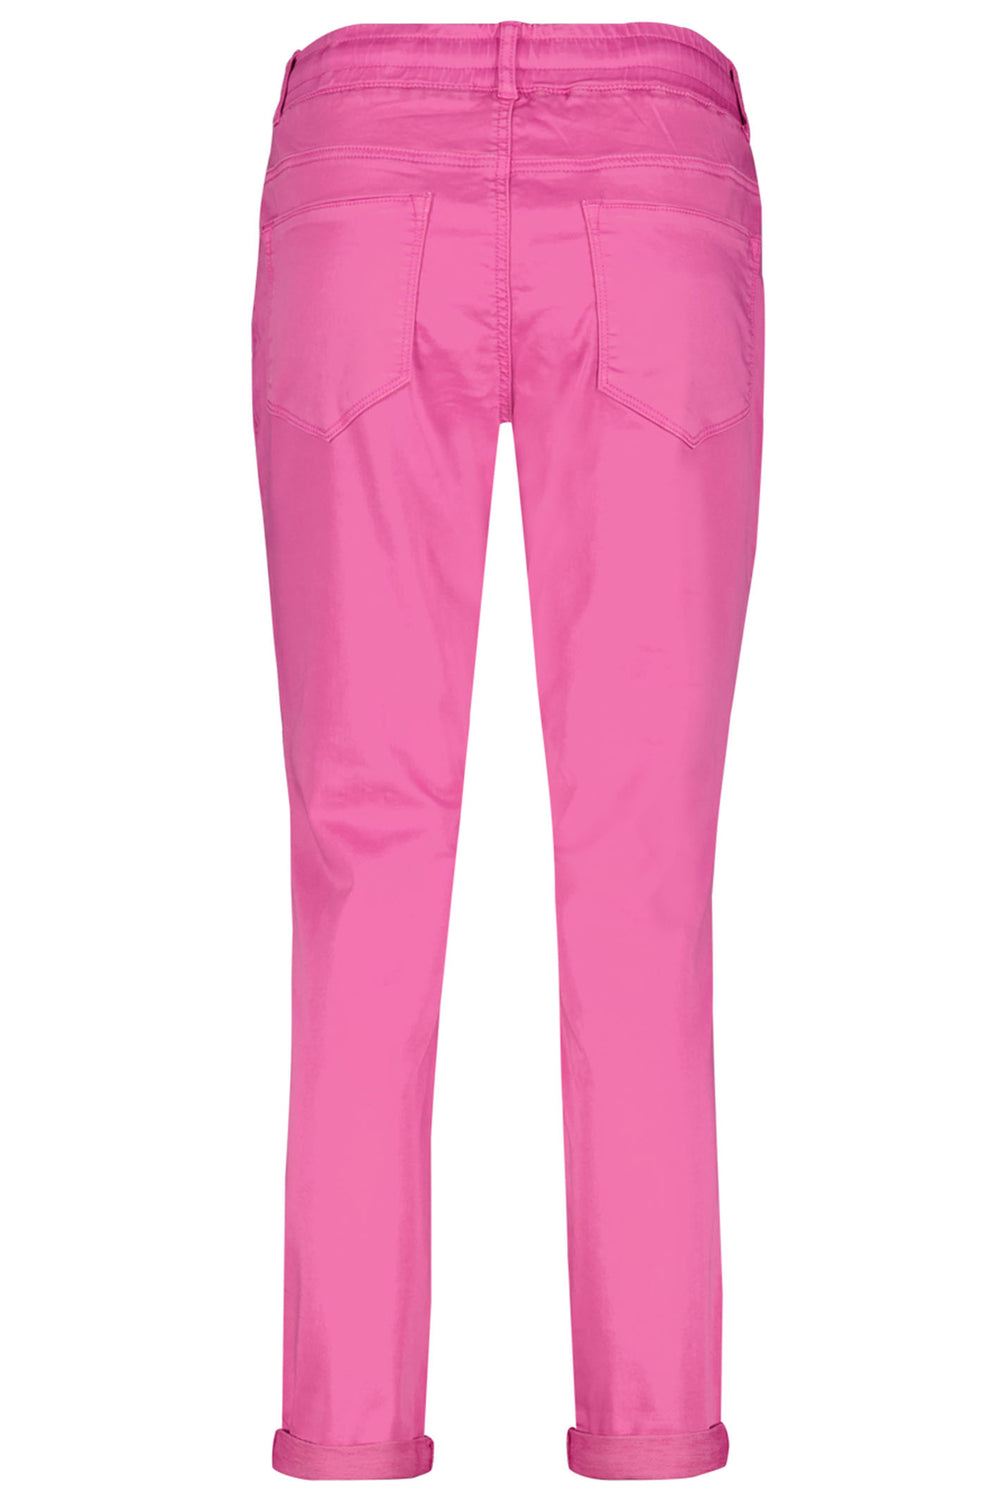 Red Button SRB4154 Cyclaam Pink Tessy Jogger Trousers 74cm - Olivia Grace Fashion